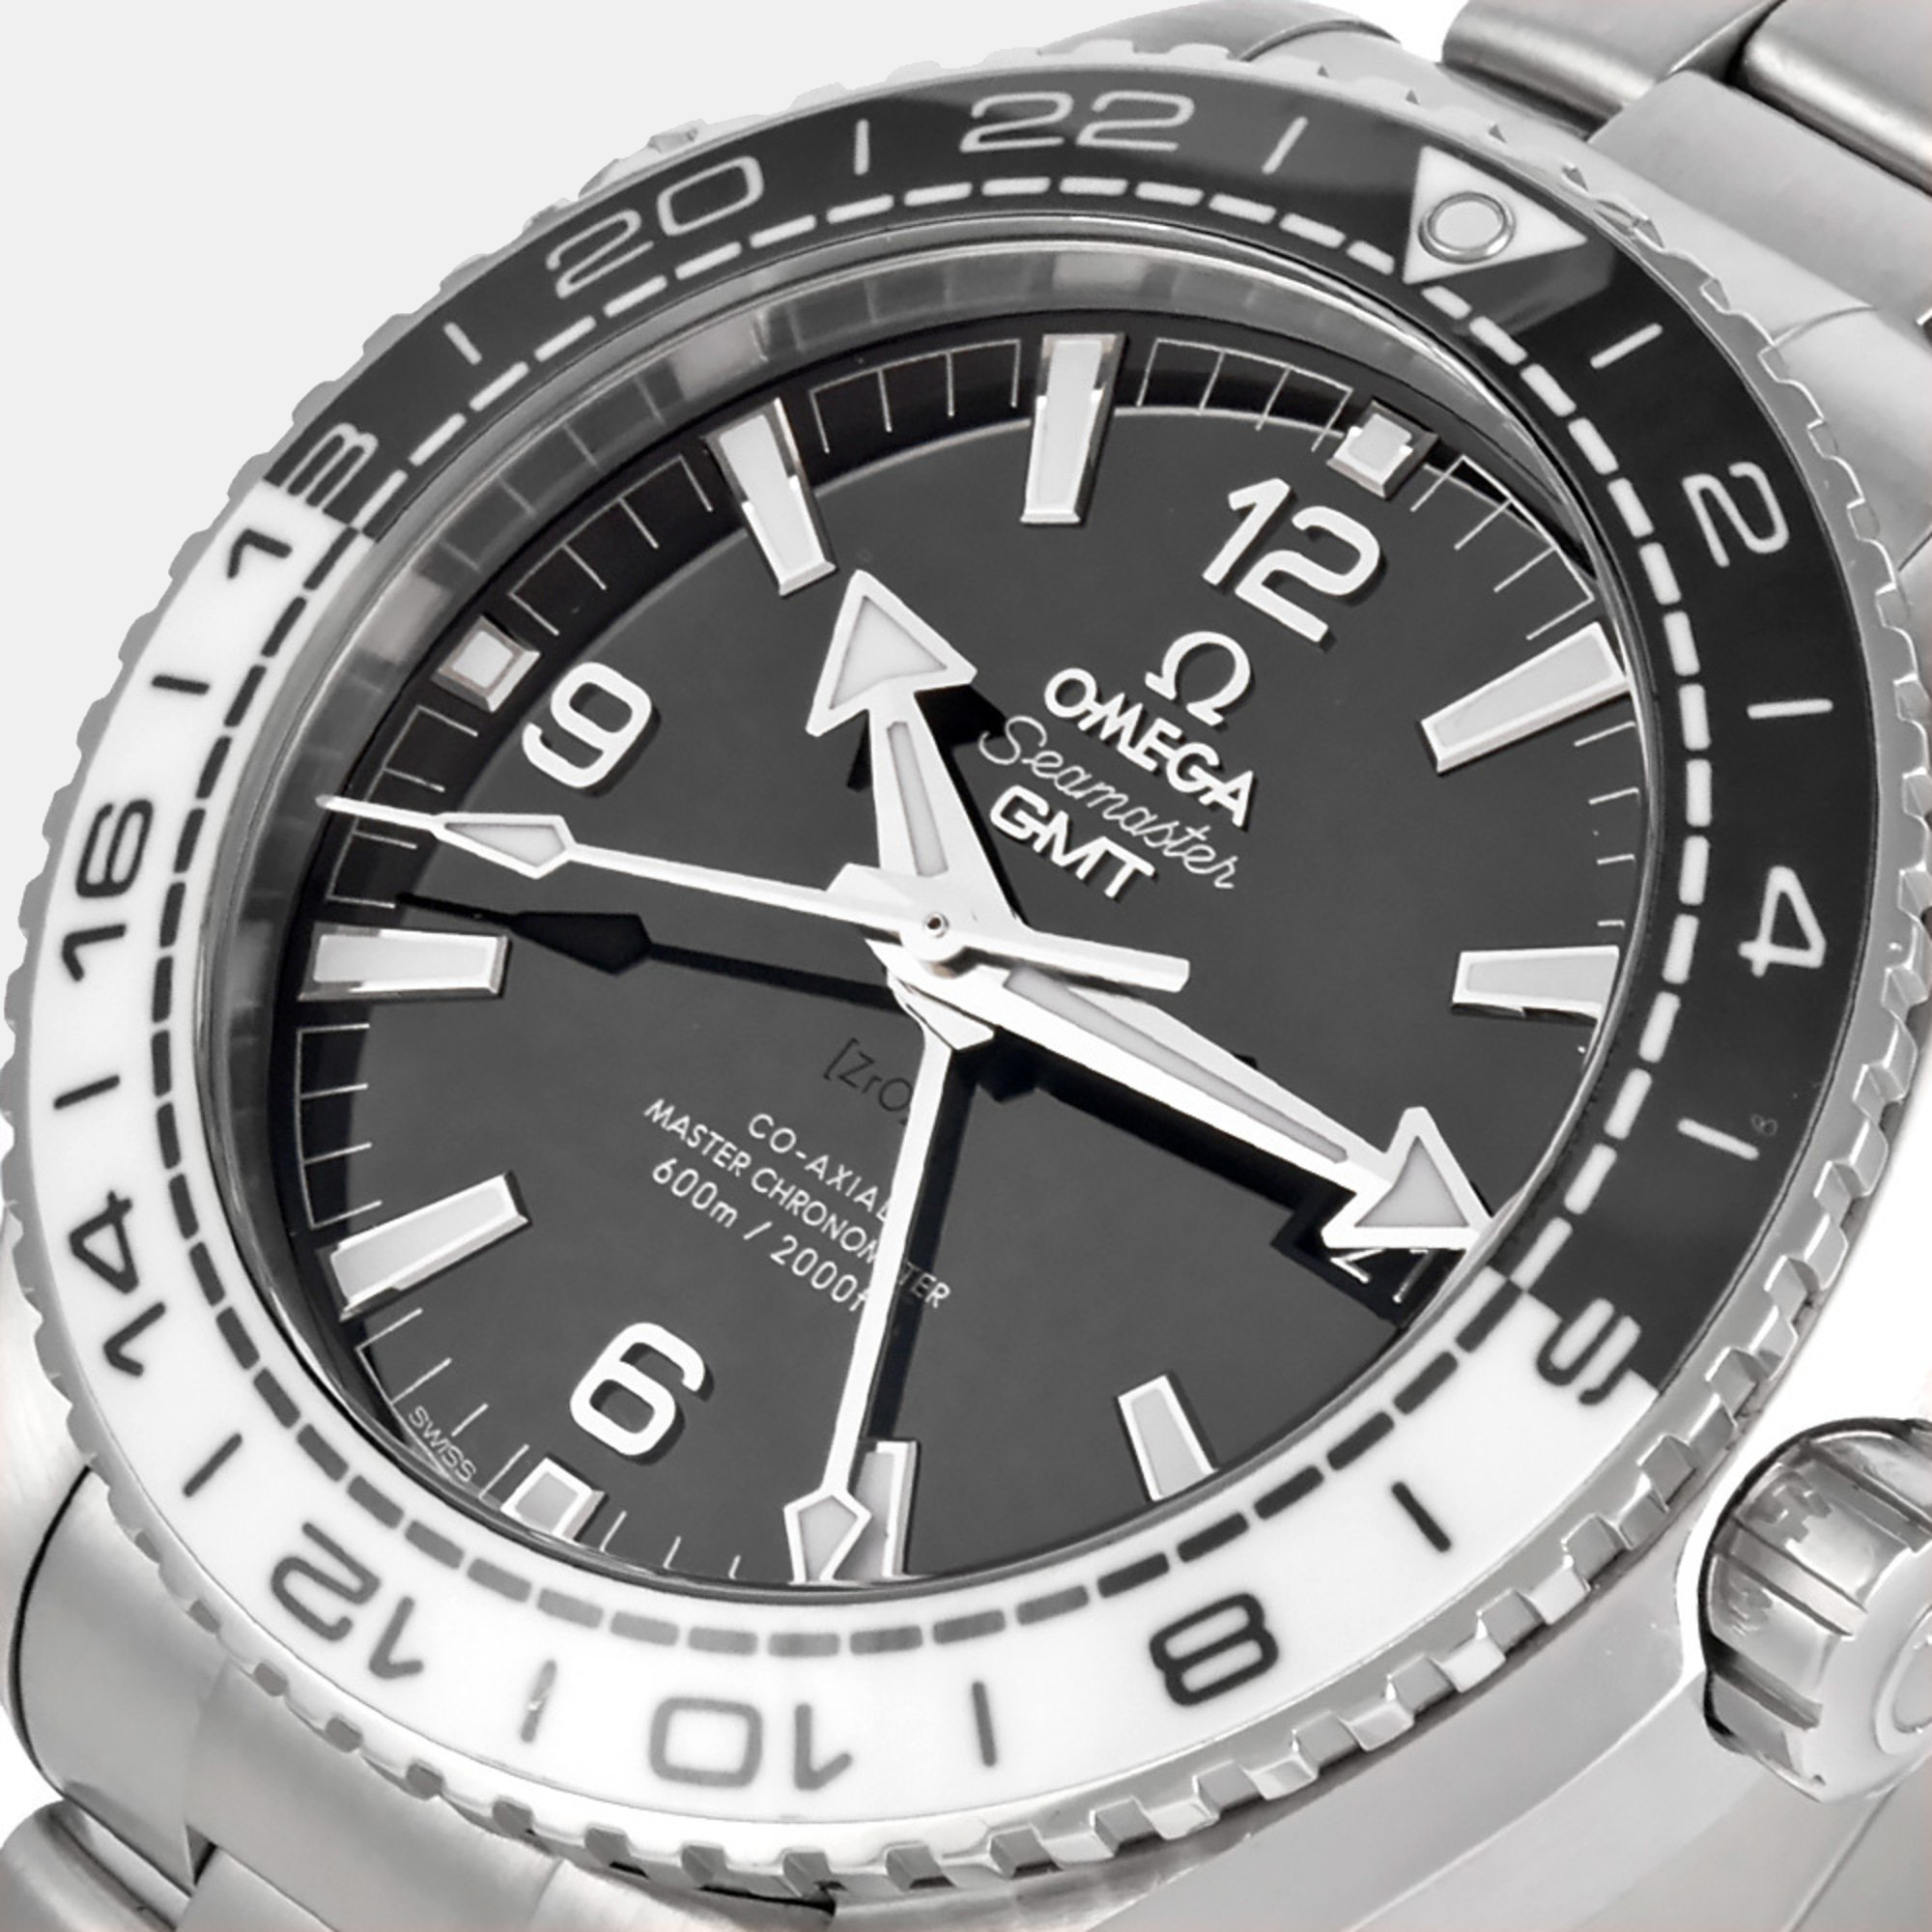 Omega Black Stainless Steel Seamaster Planet Ocean 215.30.44.22.01.001 Automatic Men's Wristwatch 43 Mm